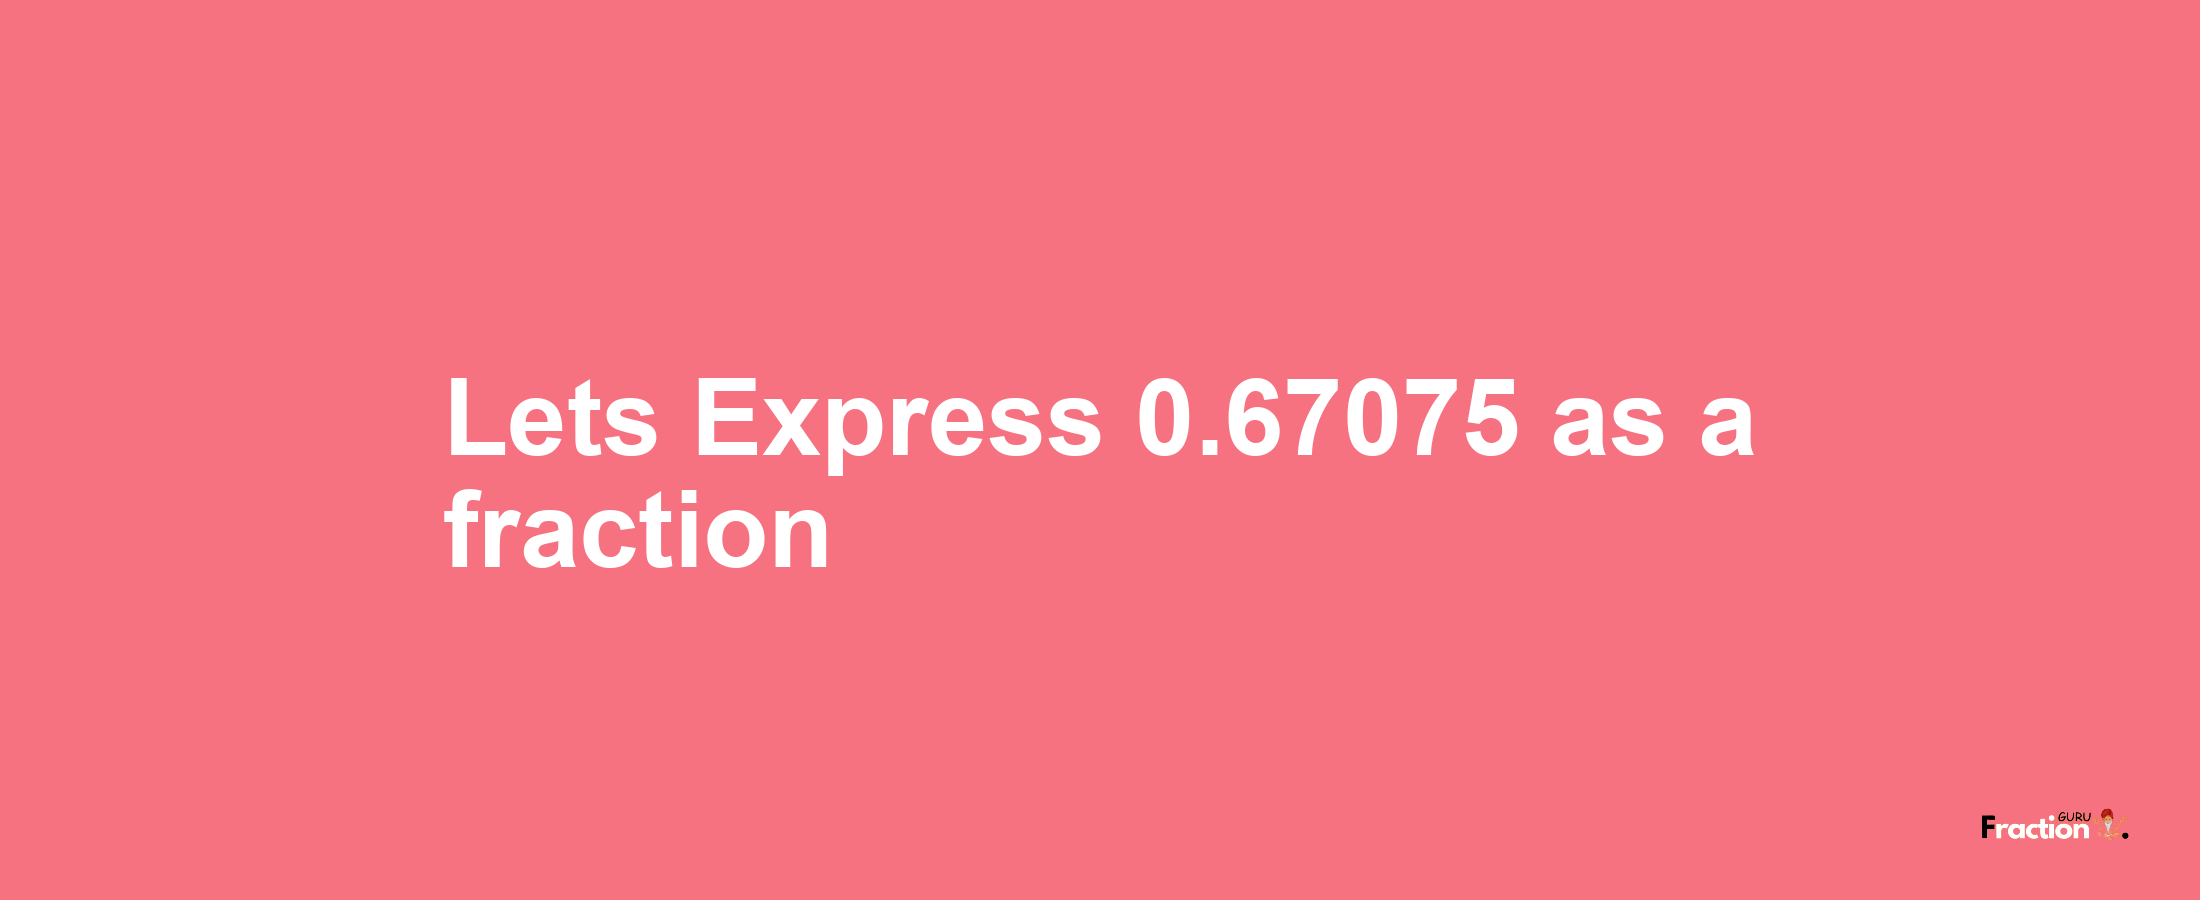 Lets Express 0.67075 as afraction